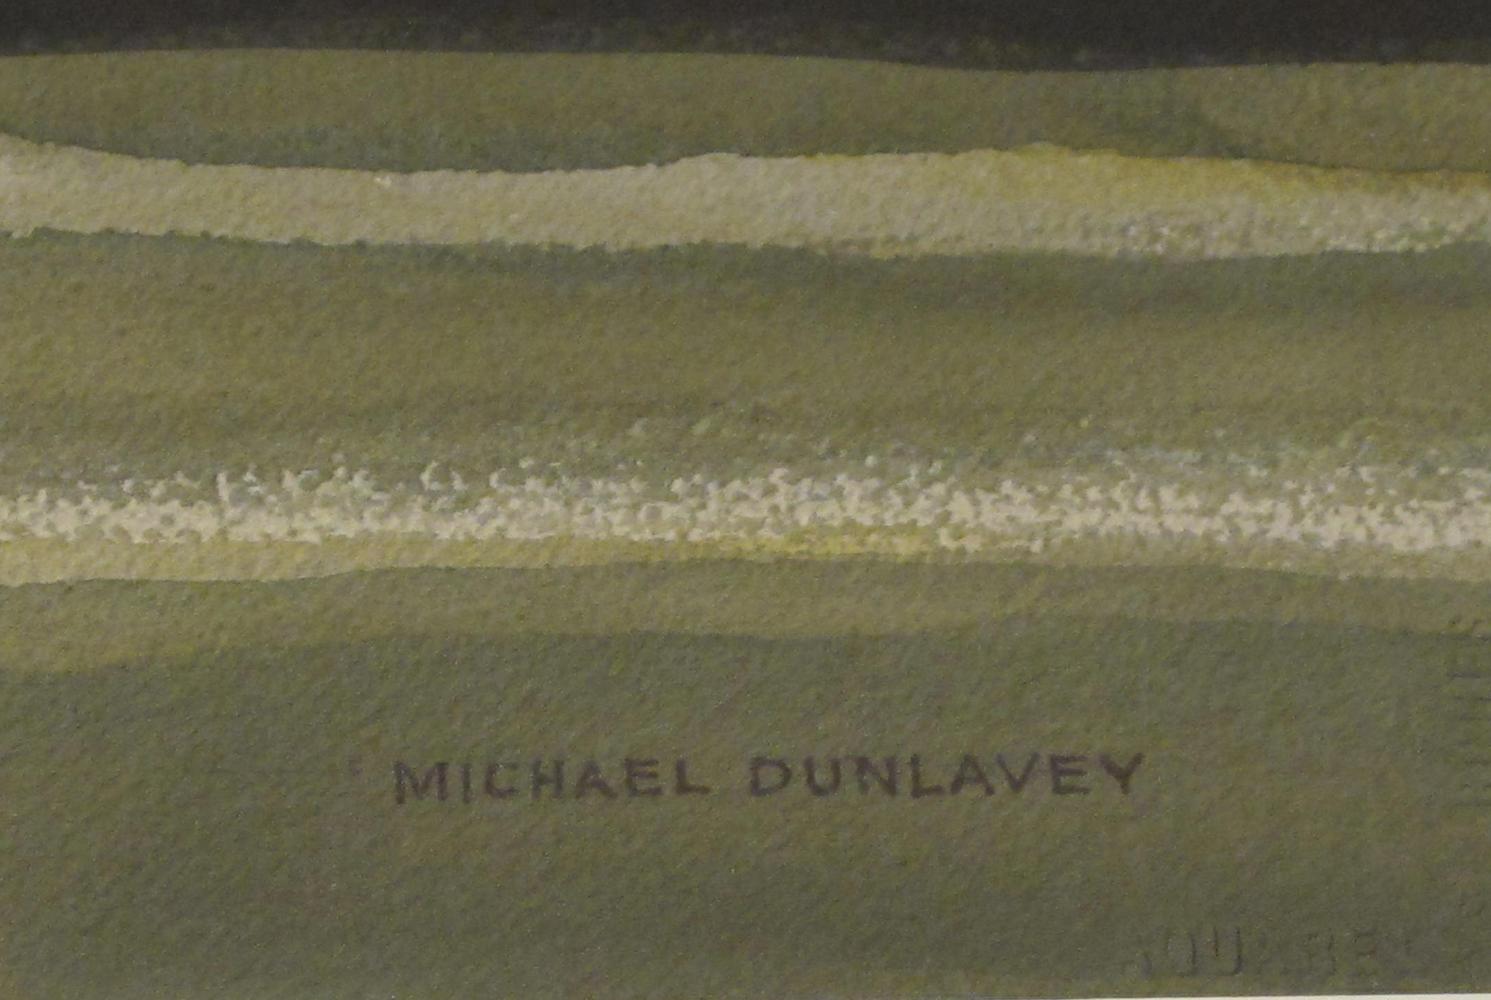 Hand-Crafted Watercolor on Paper 'Sea Dog, Santa Barbara, California' Signed Michael Dunlavey For Sale